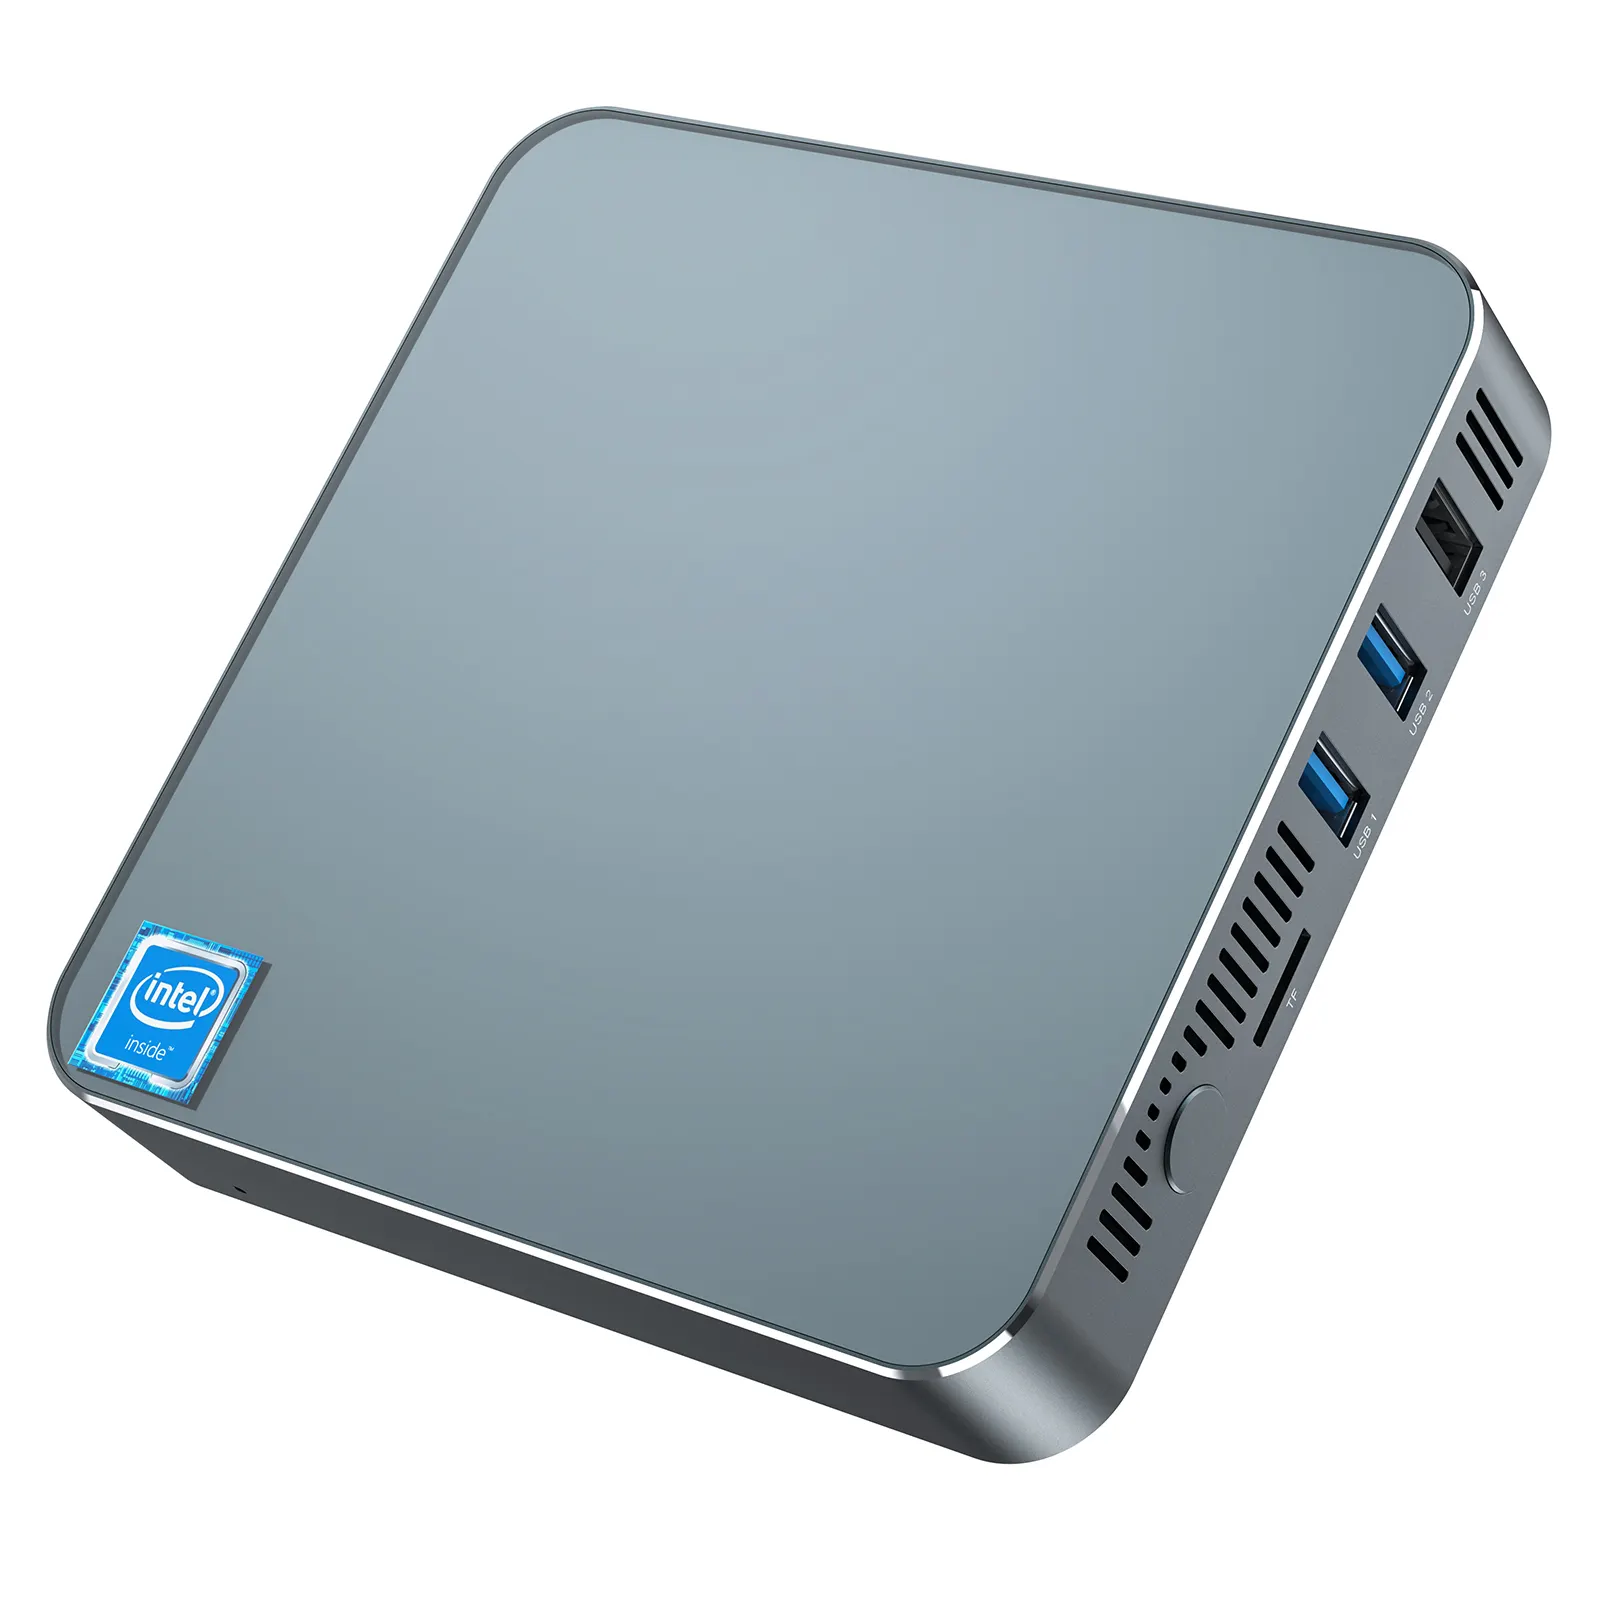 Intel Pc Apollo Lack Metal N3350 CPU J4125 J3455 AK7 with Win10& Linux for Outdoor Display Connect Projector Gaming use mini pc